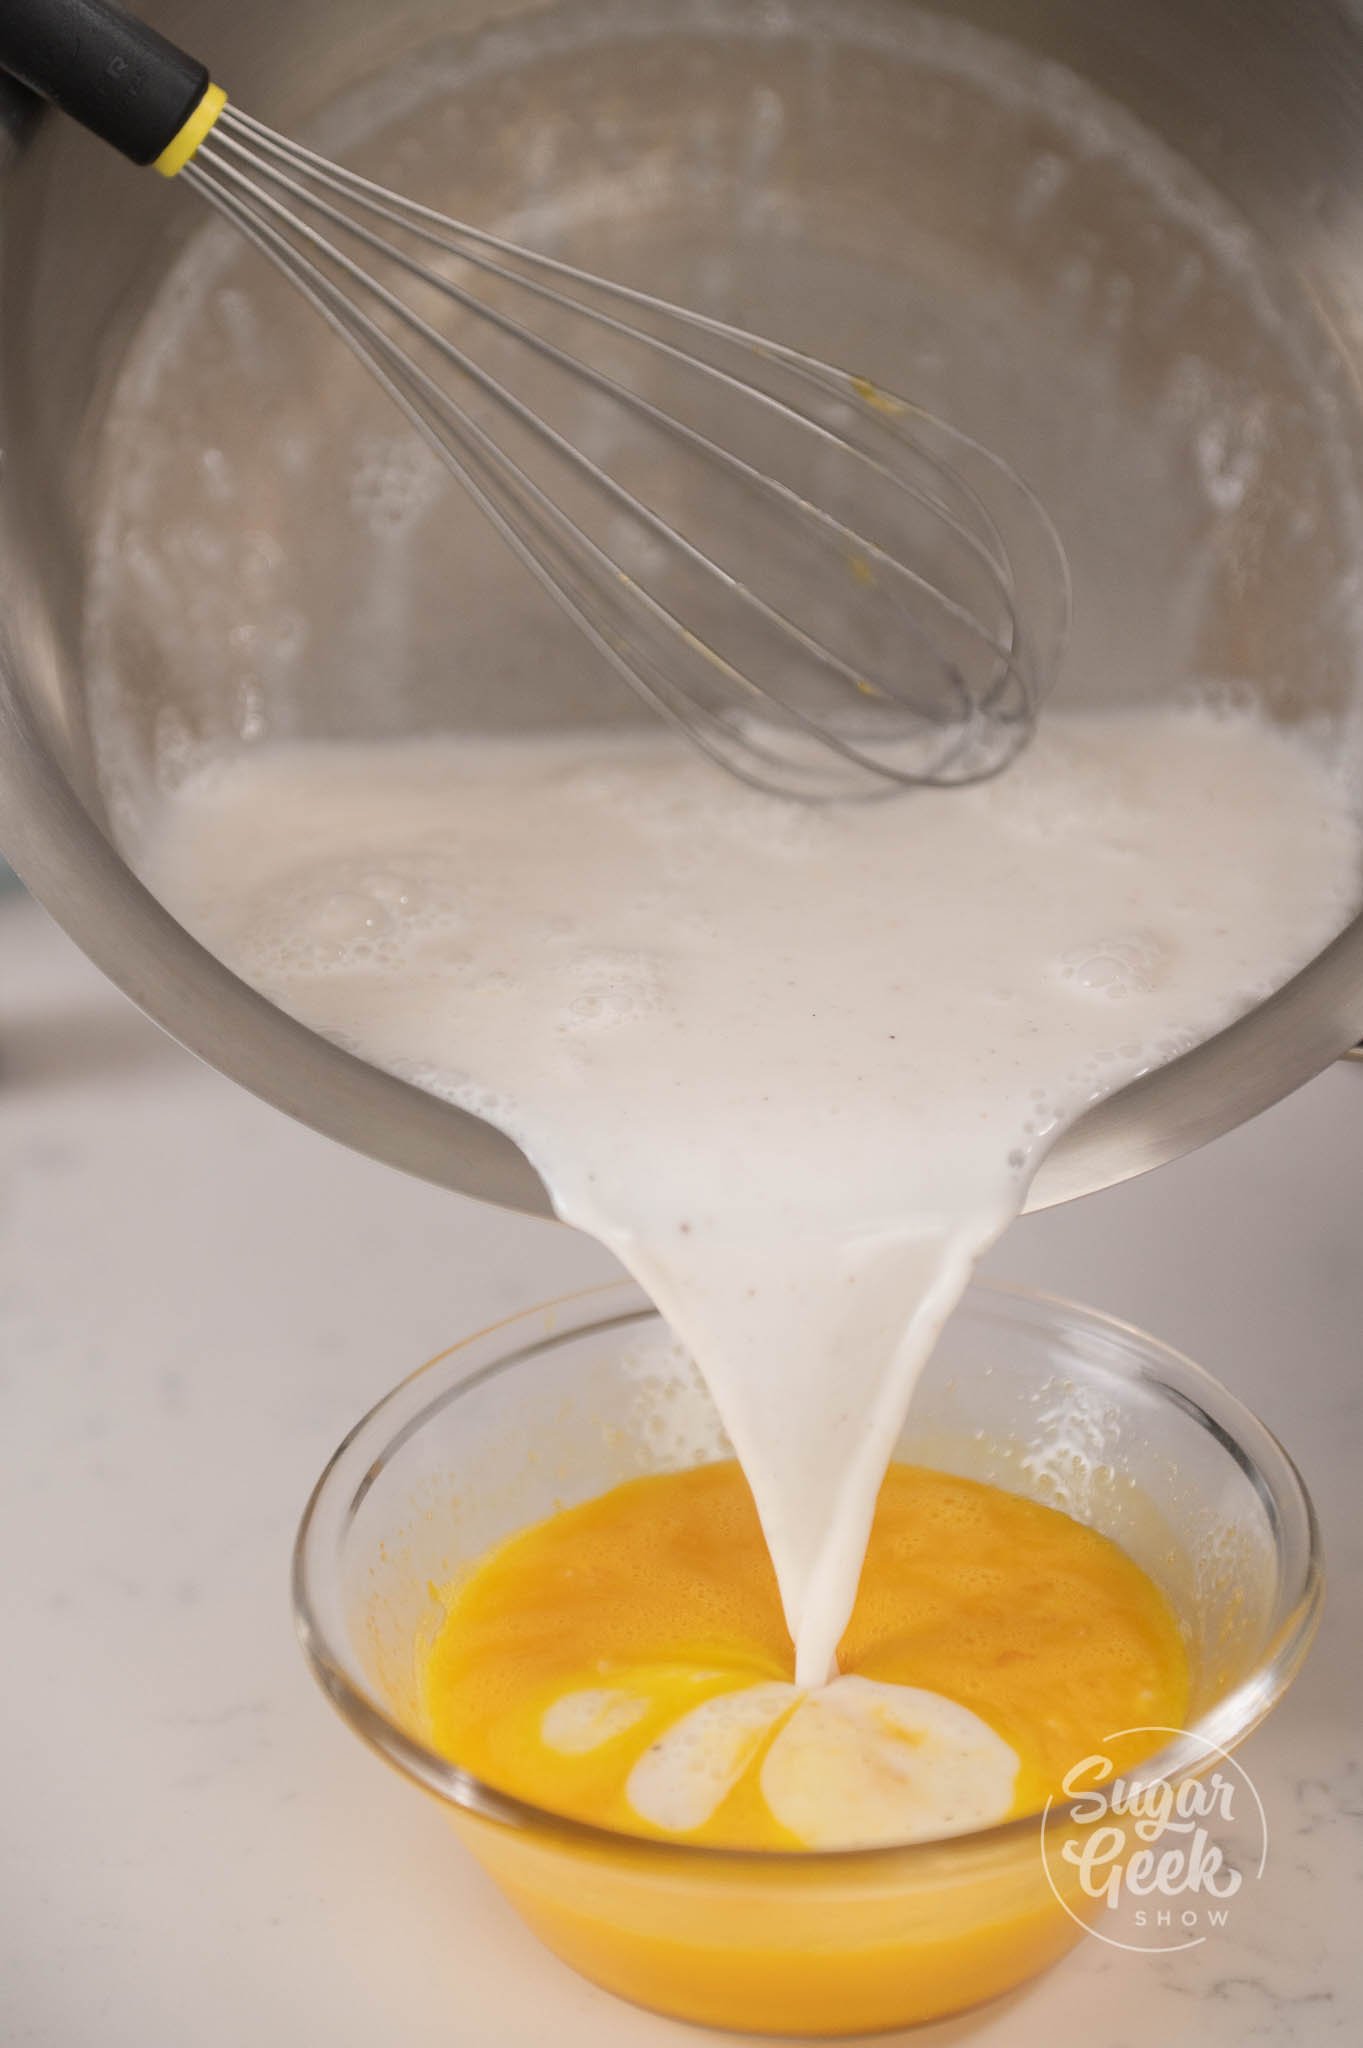 potnof cream being poured into container of yolks.